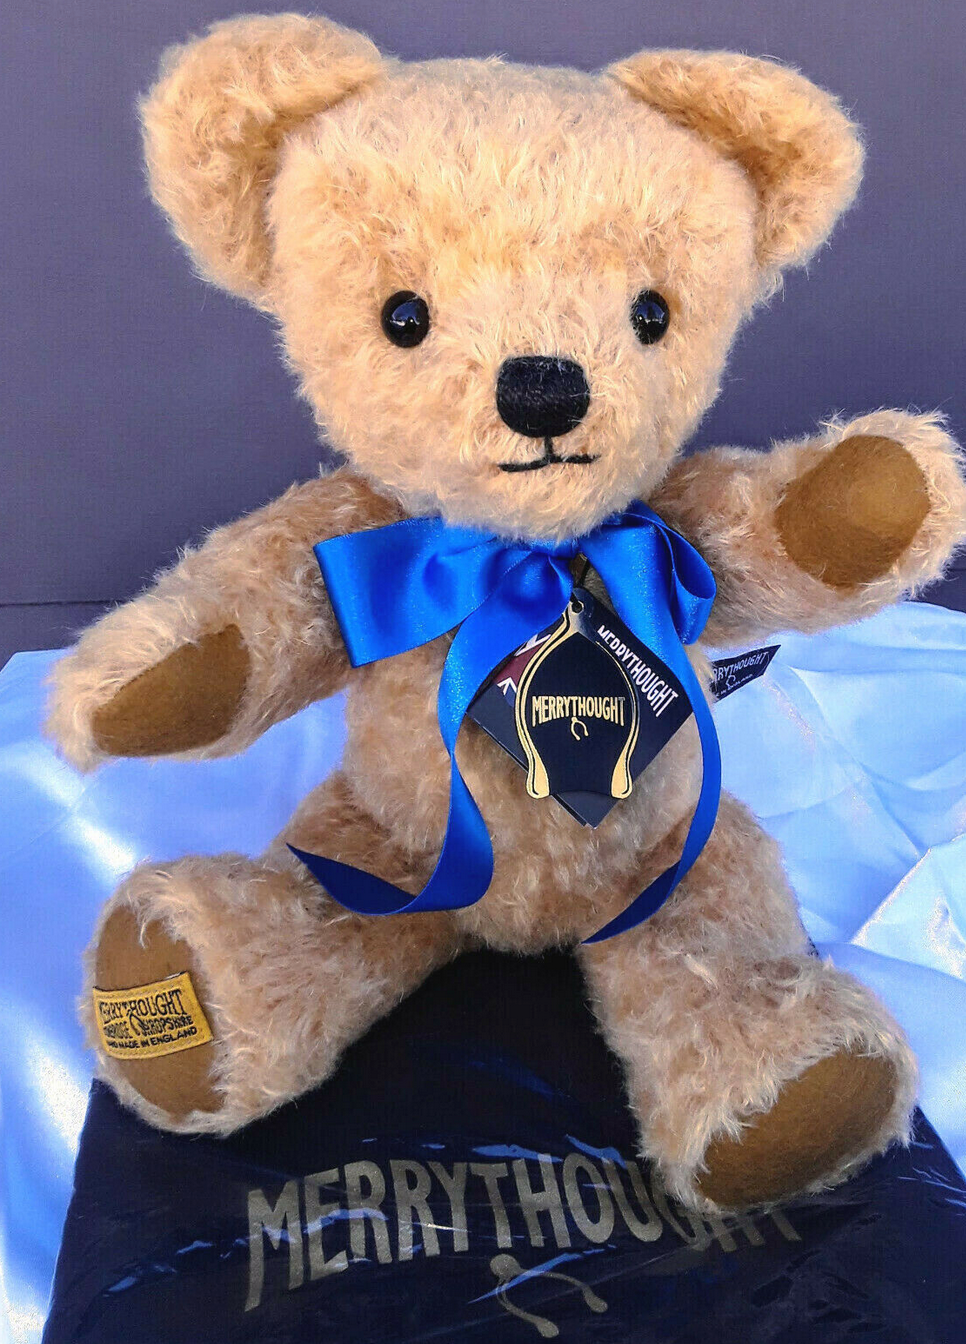 London Curly Gold - 16" Teddy Bear with Growler by Merrythought